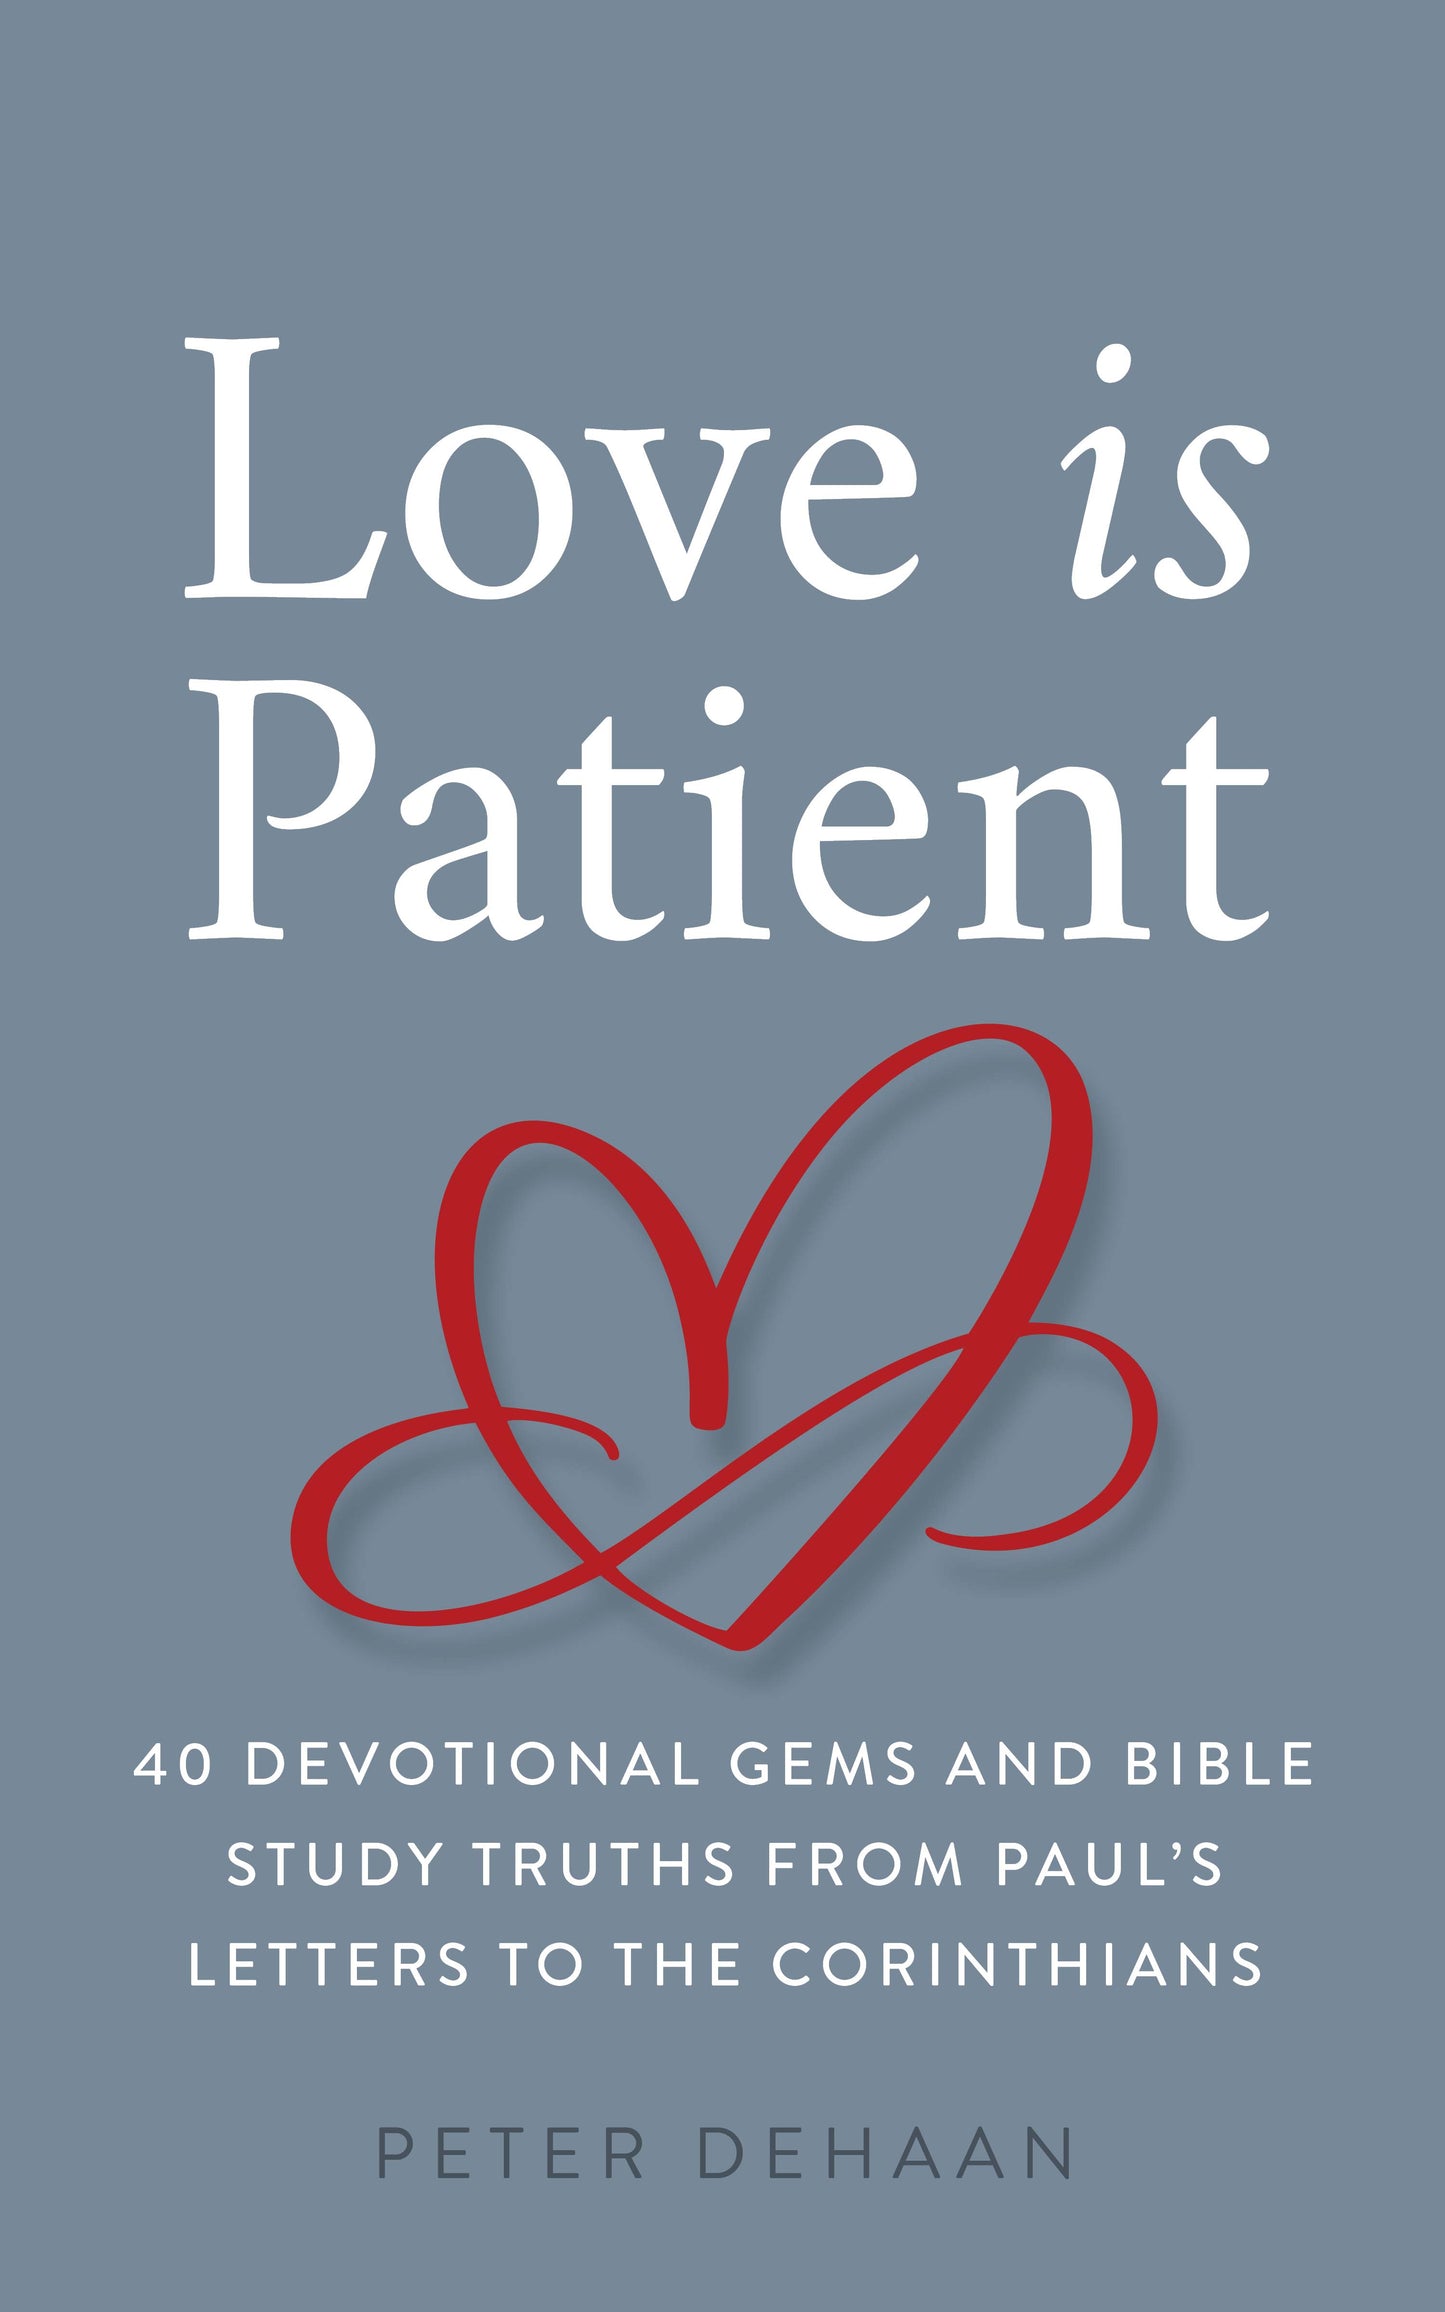 Love Is Patient: 40 Devotional Gems and Bible Study Truths from Paul’s Letters to the Corinthians (ebook)